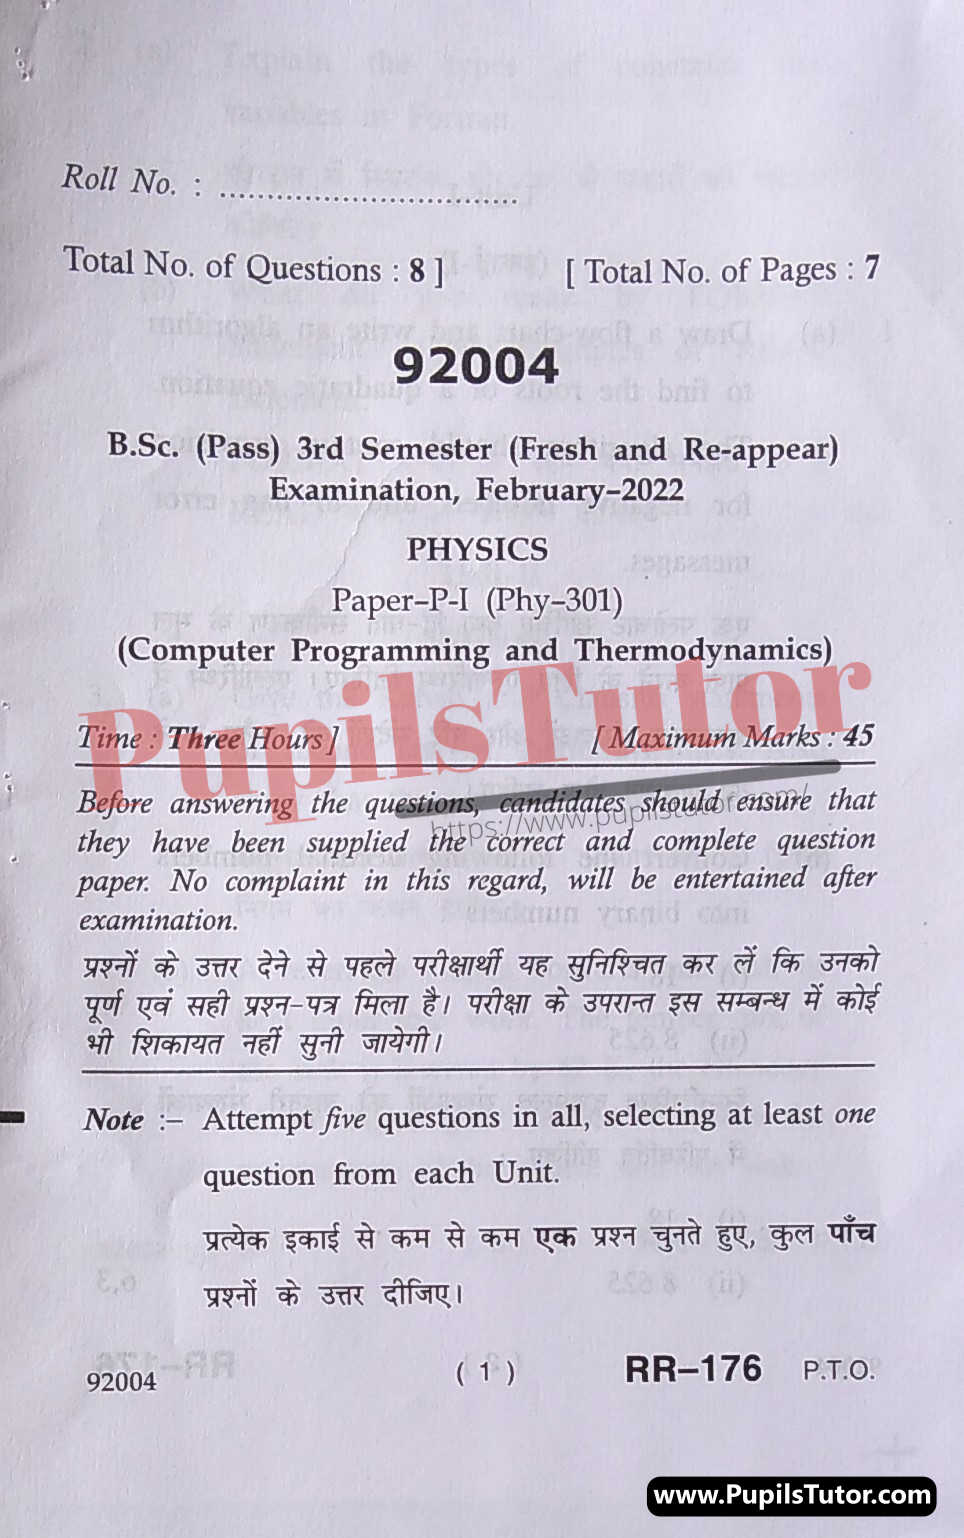 MDU (Maharshi Dayanand University, Rohtak Haryana) BSc Physics Pass Course Third Semester Previous Year Computer Programming And Thermodynamics Question Paper For February, 2022 Exam (Question Paper Page 1) - pupilstutor.com